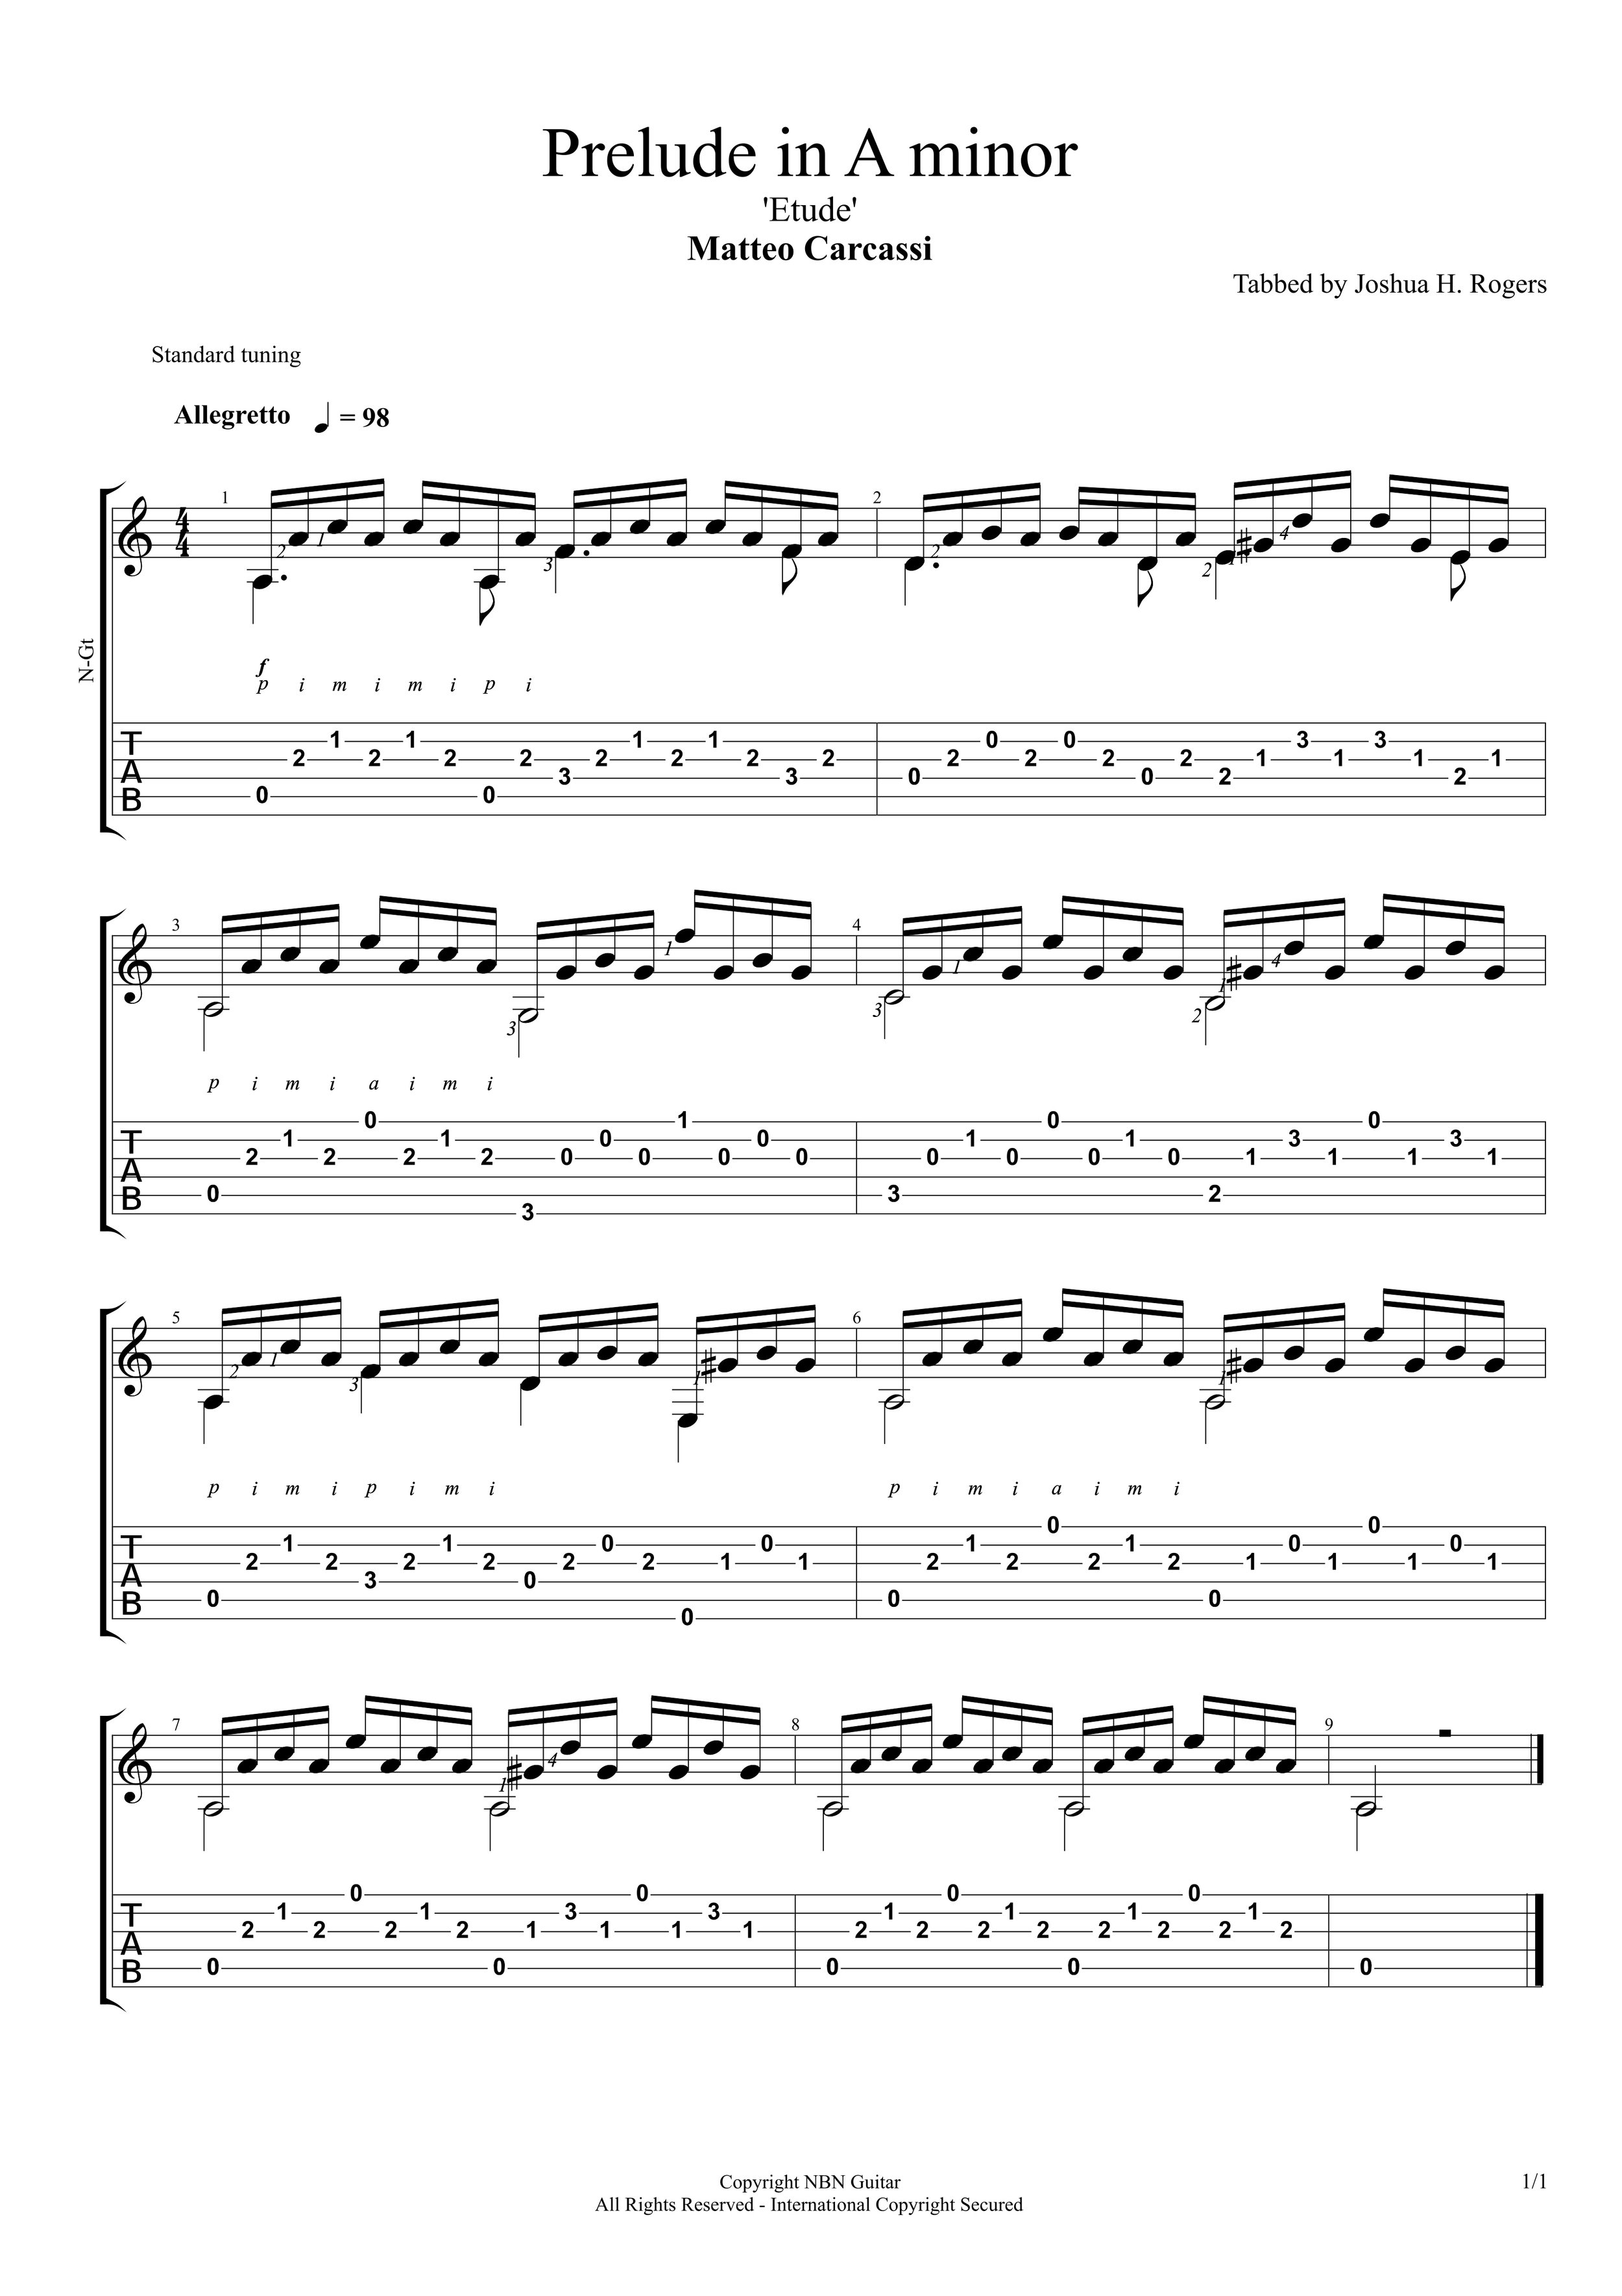 Prelude in A minor - Carcassi (Sheet music & Tabs)-p3.jpg